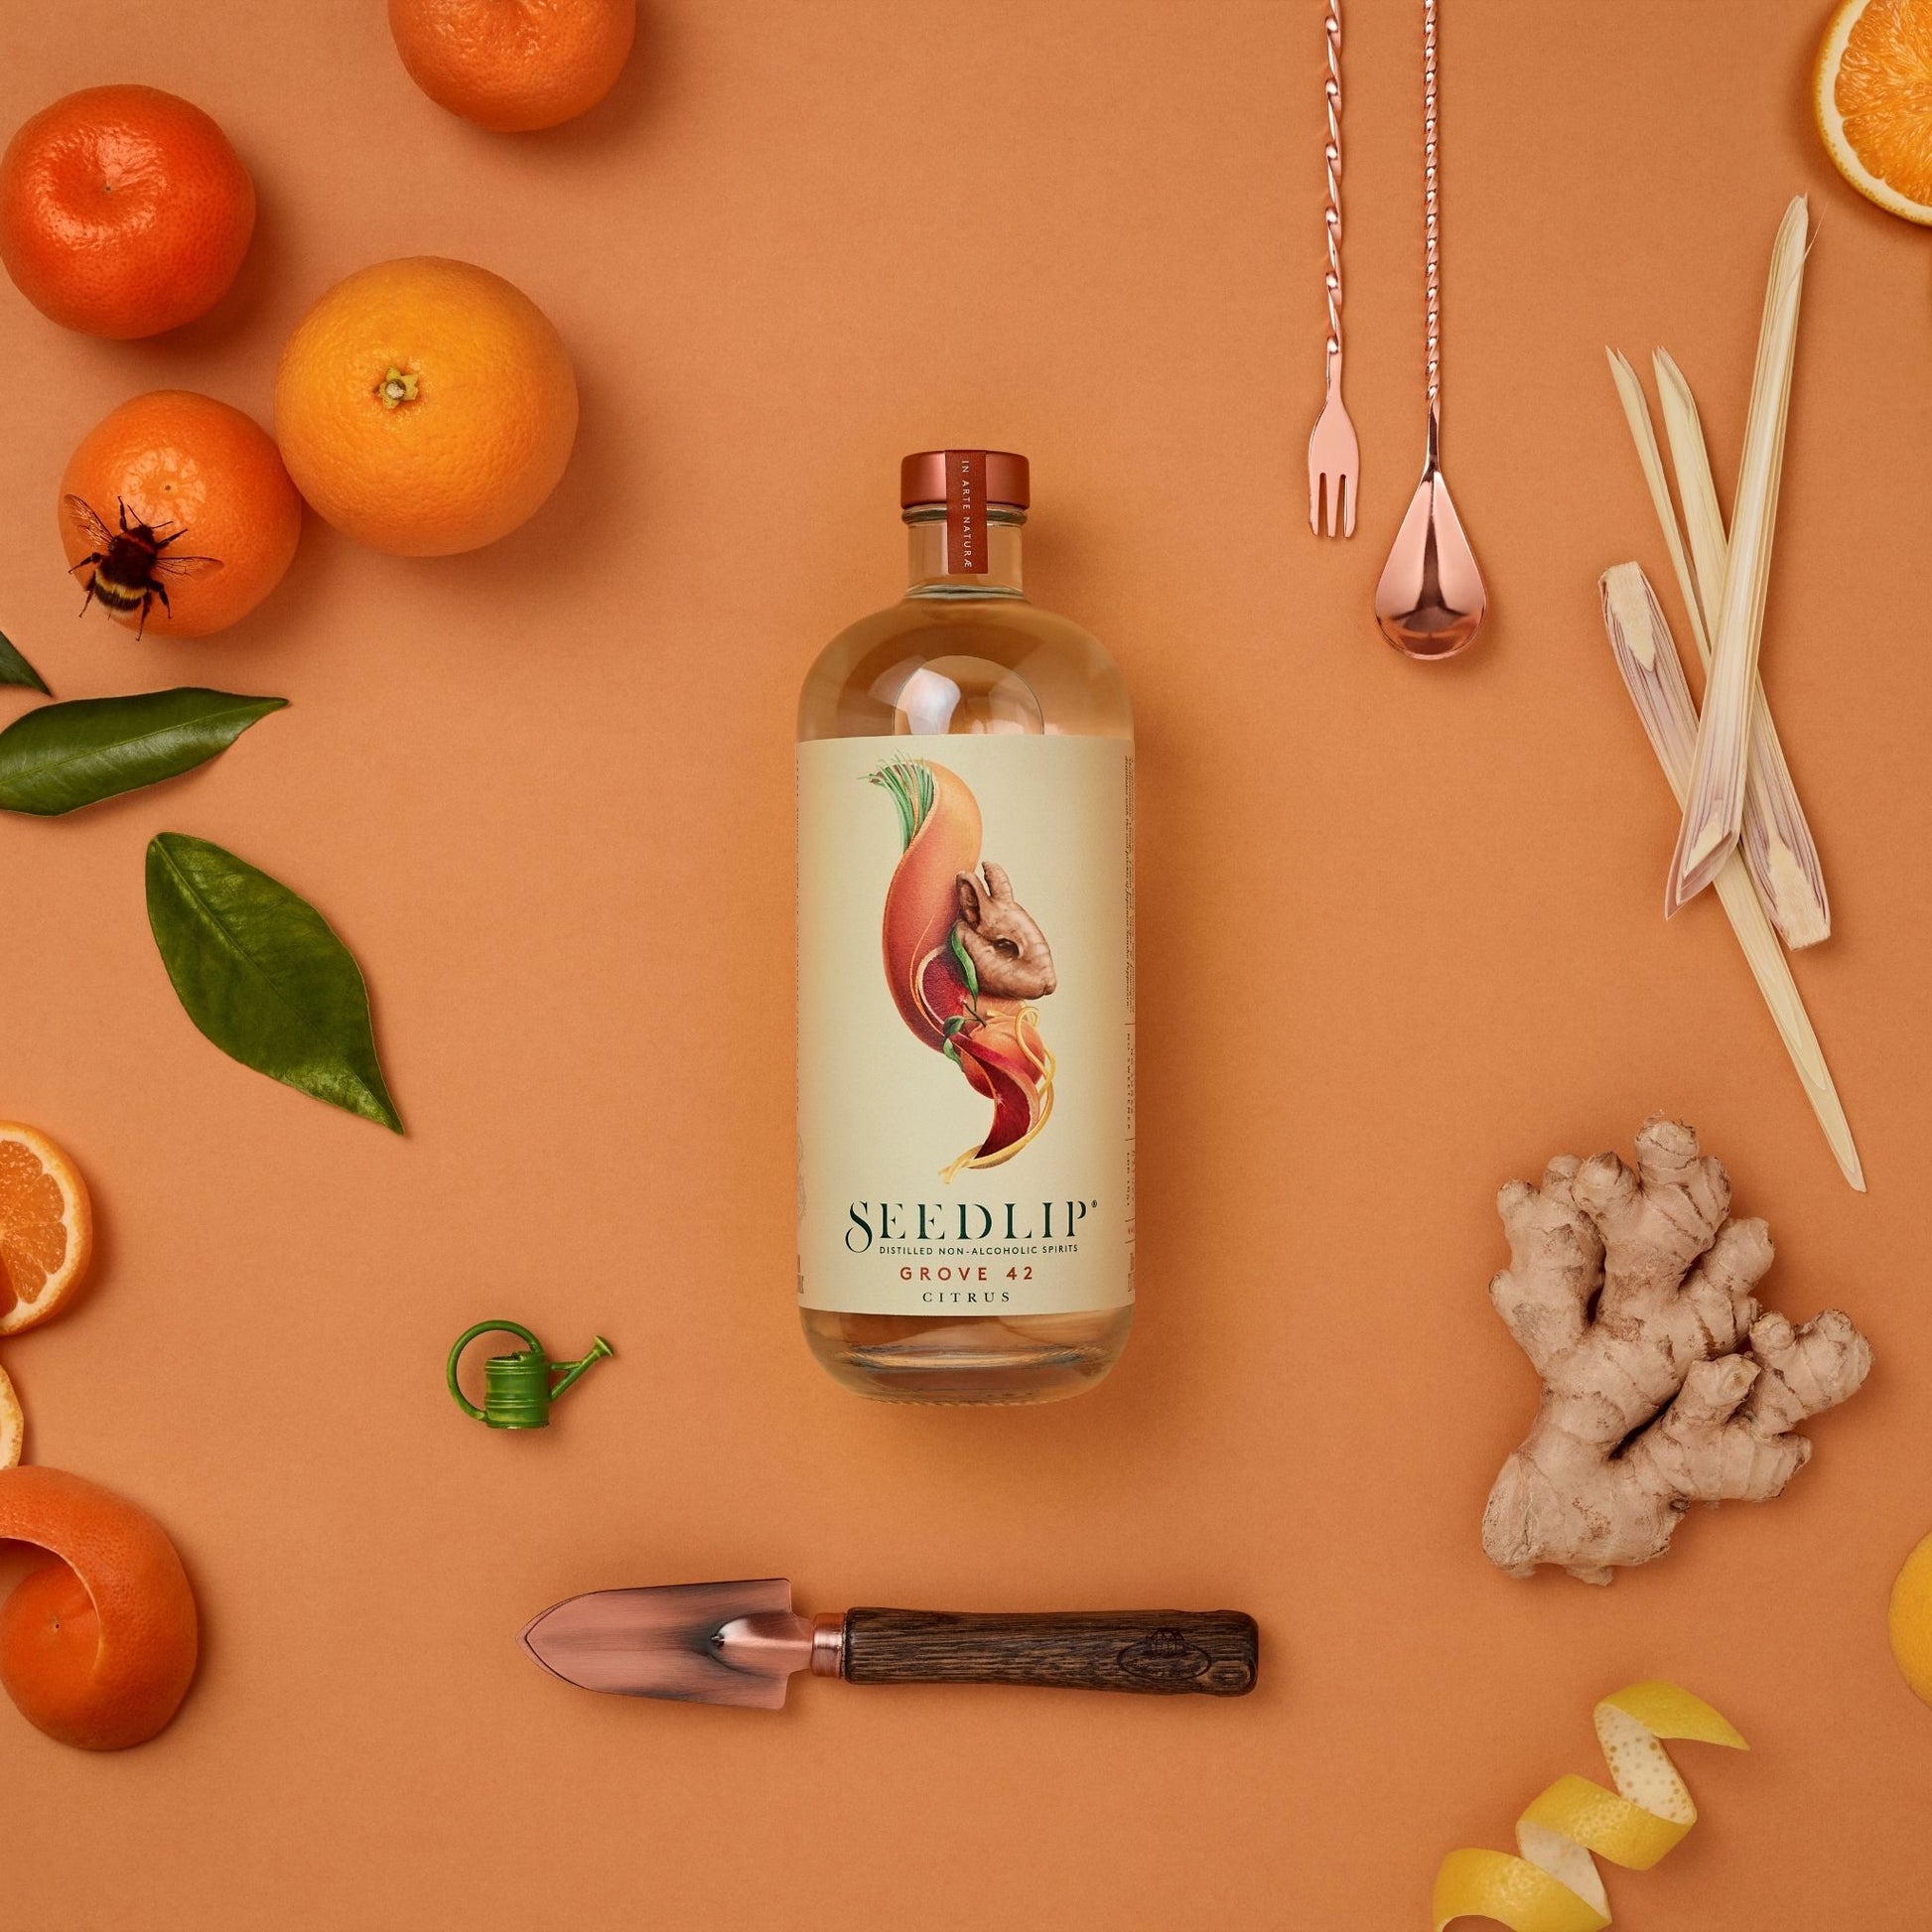 A photo of a 700 milliliter bottle of Seedlip Grove 42 Citrus surrounded by herbs, fruits, and bar tools.  Seedlip is available for sale at knyota.com